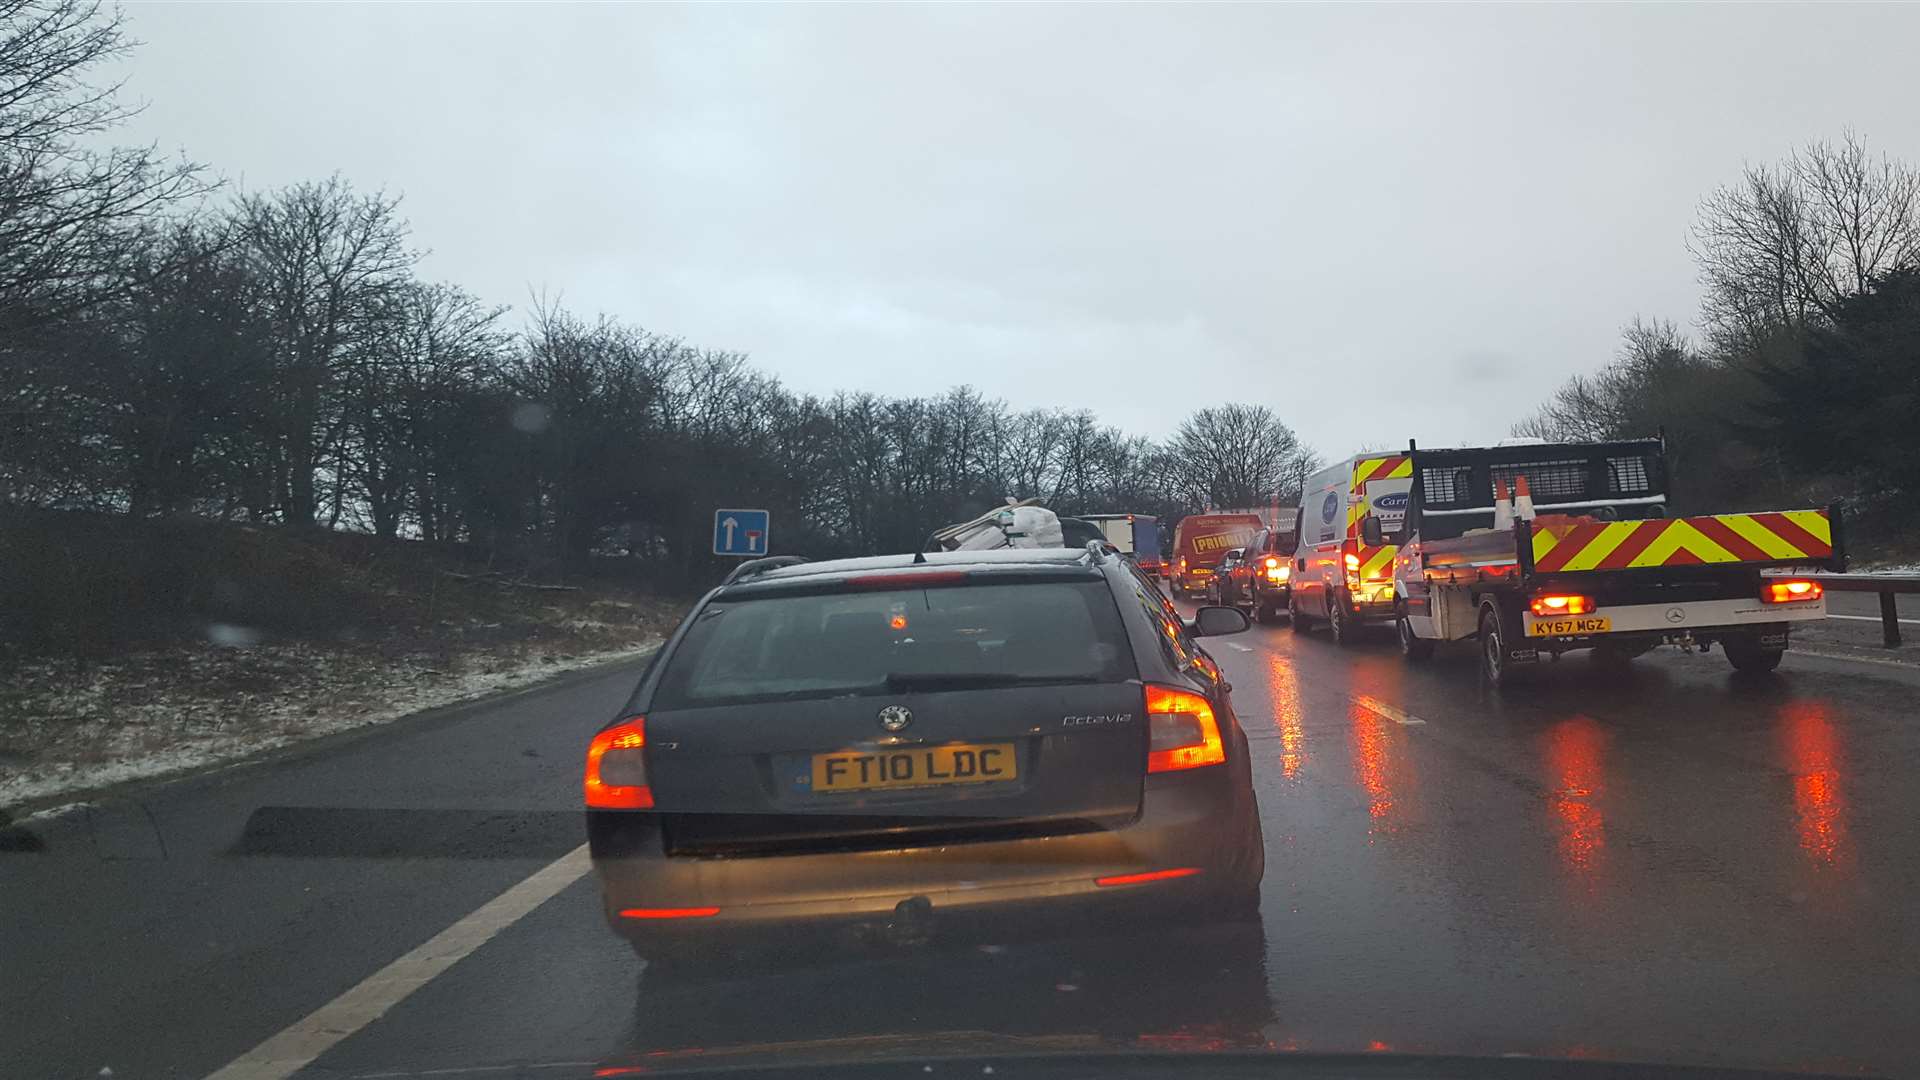 Queueing on the M2 near the Stockbury roundaobut at j5